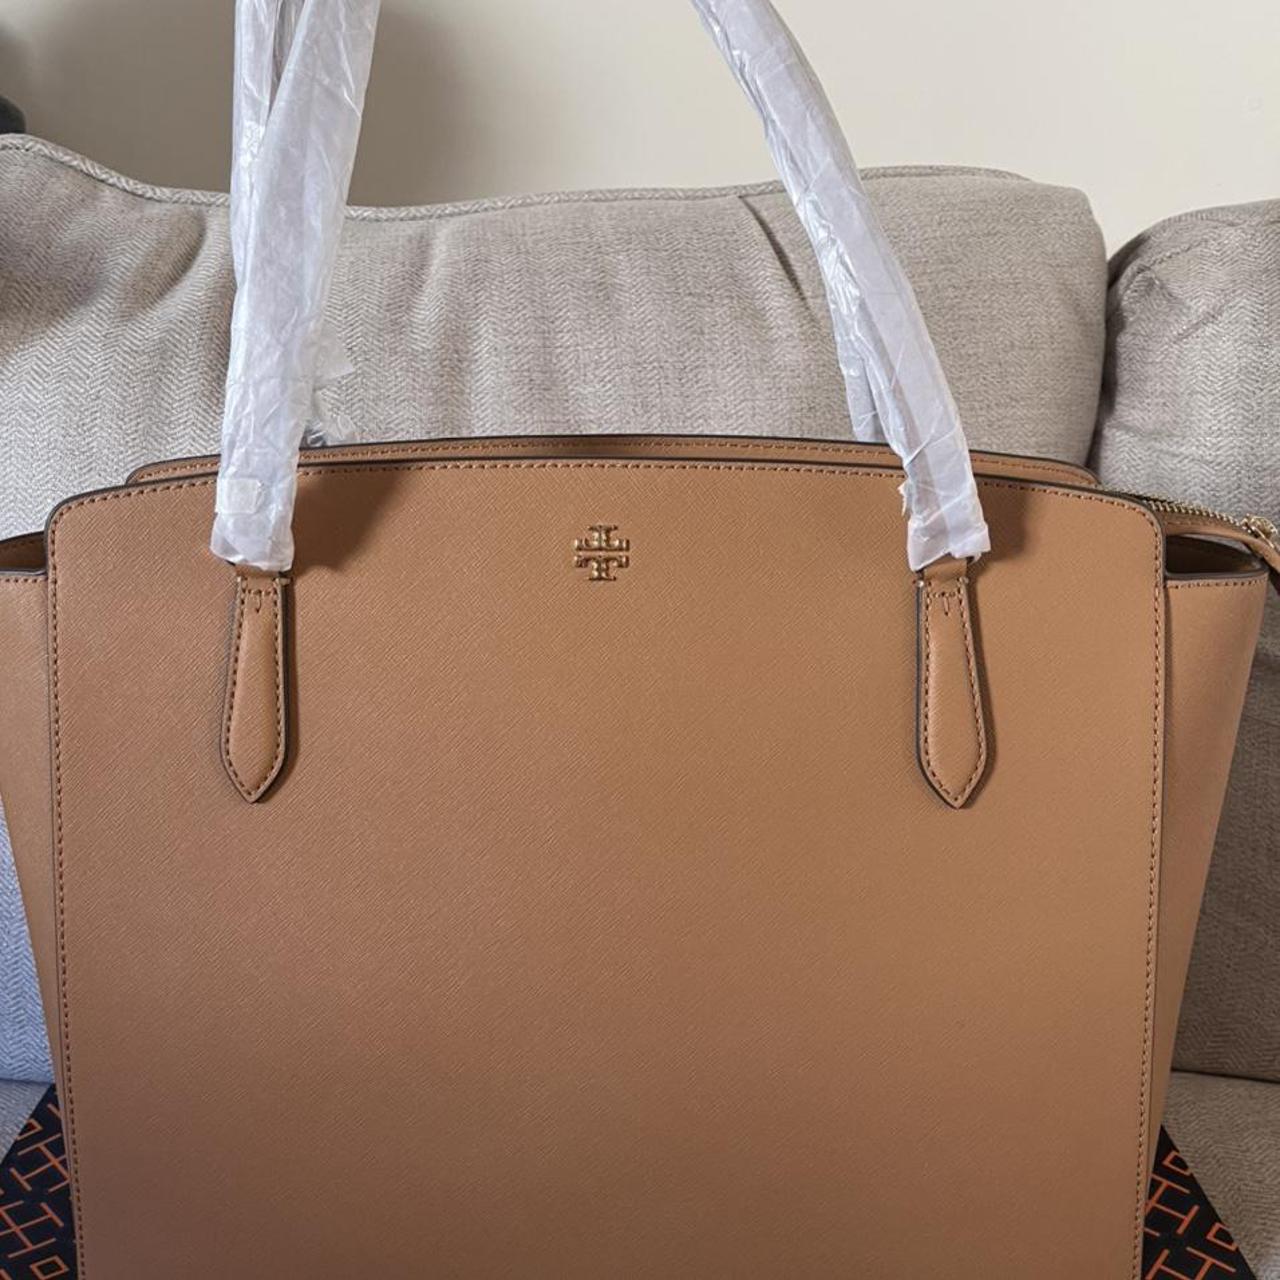 Tory Burch Emerson Laptop Large Tote 17.5 Top x - Depop